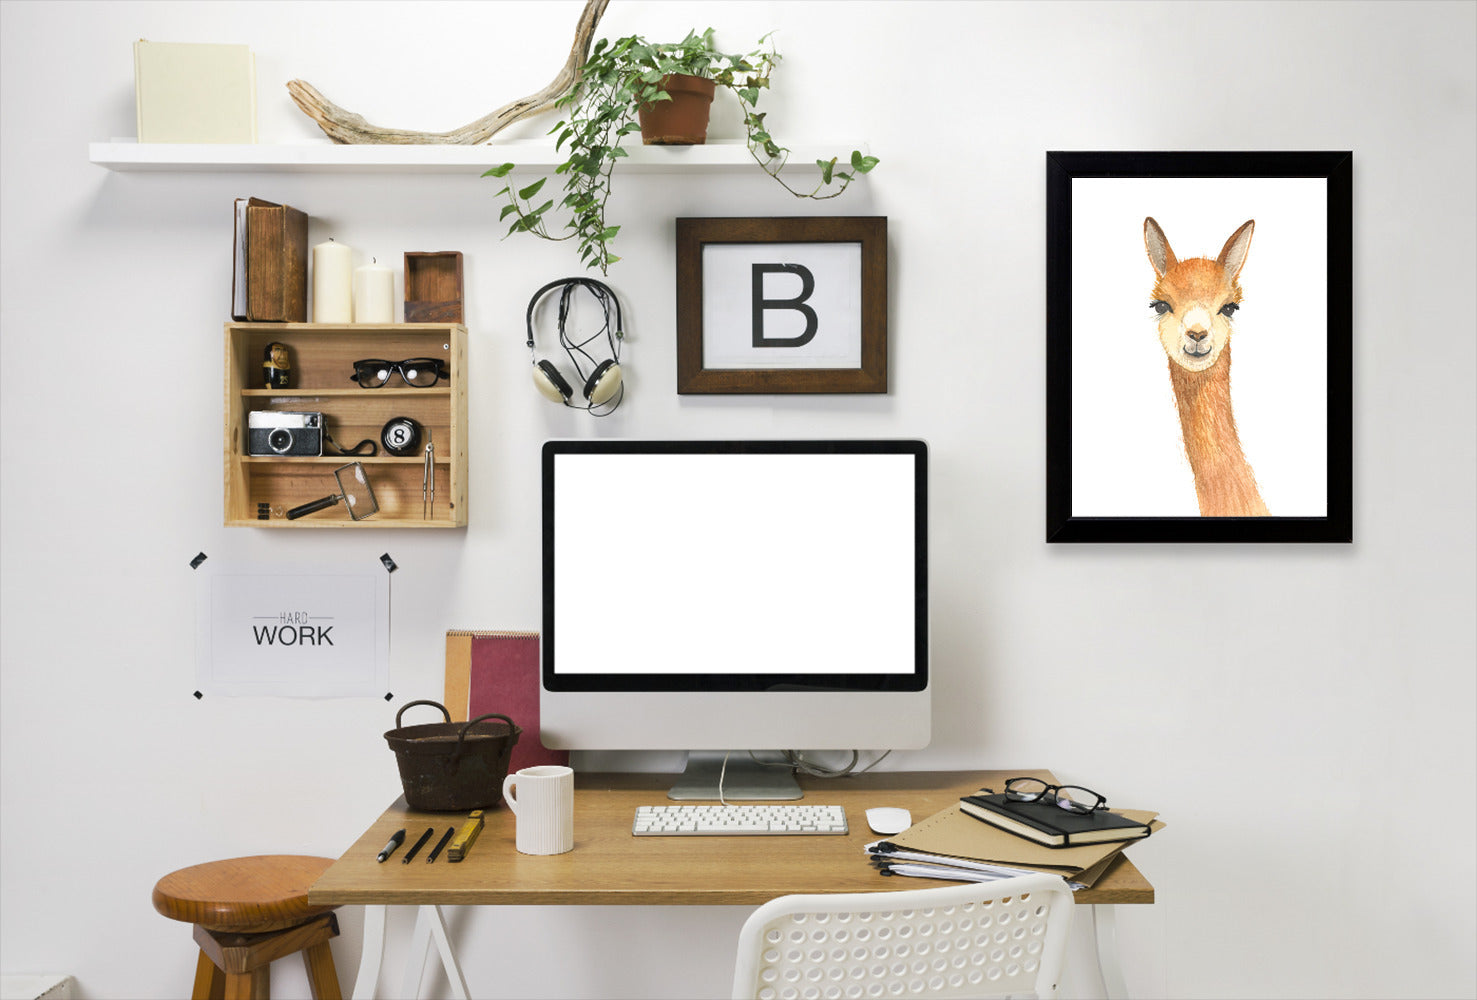 Vicuna by Cami Monet - White Framed Print - Wall Art - Americanflat